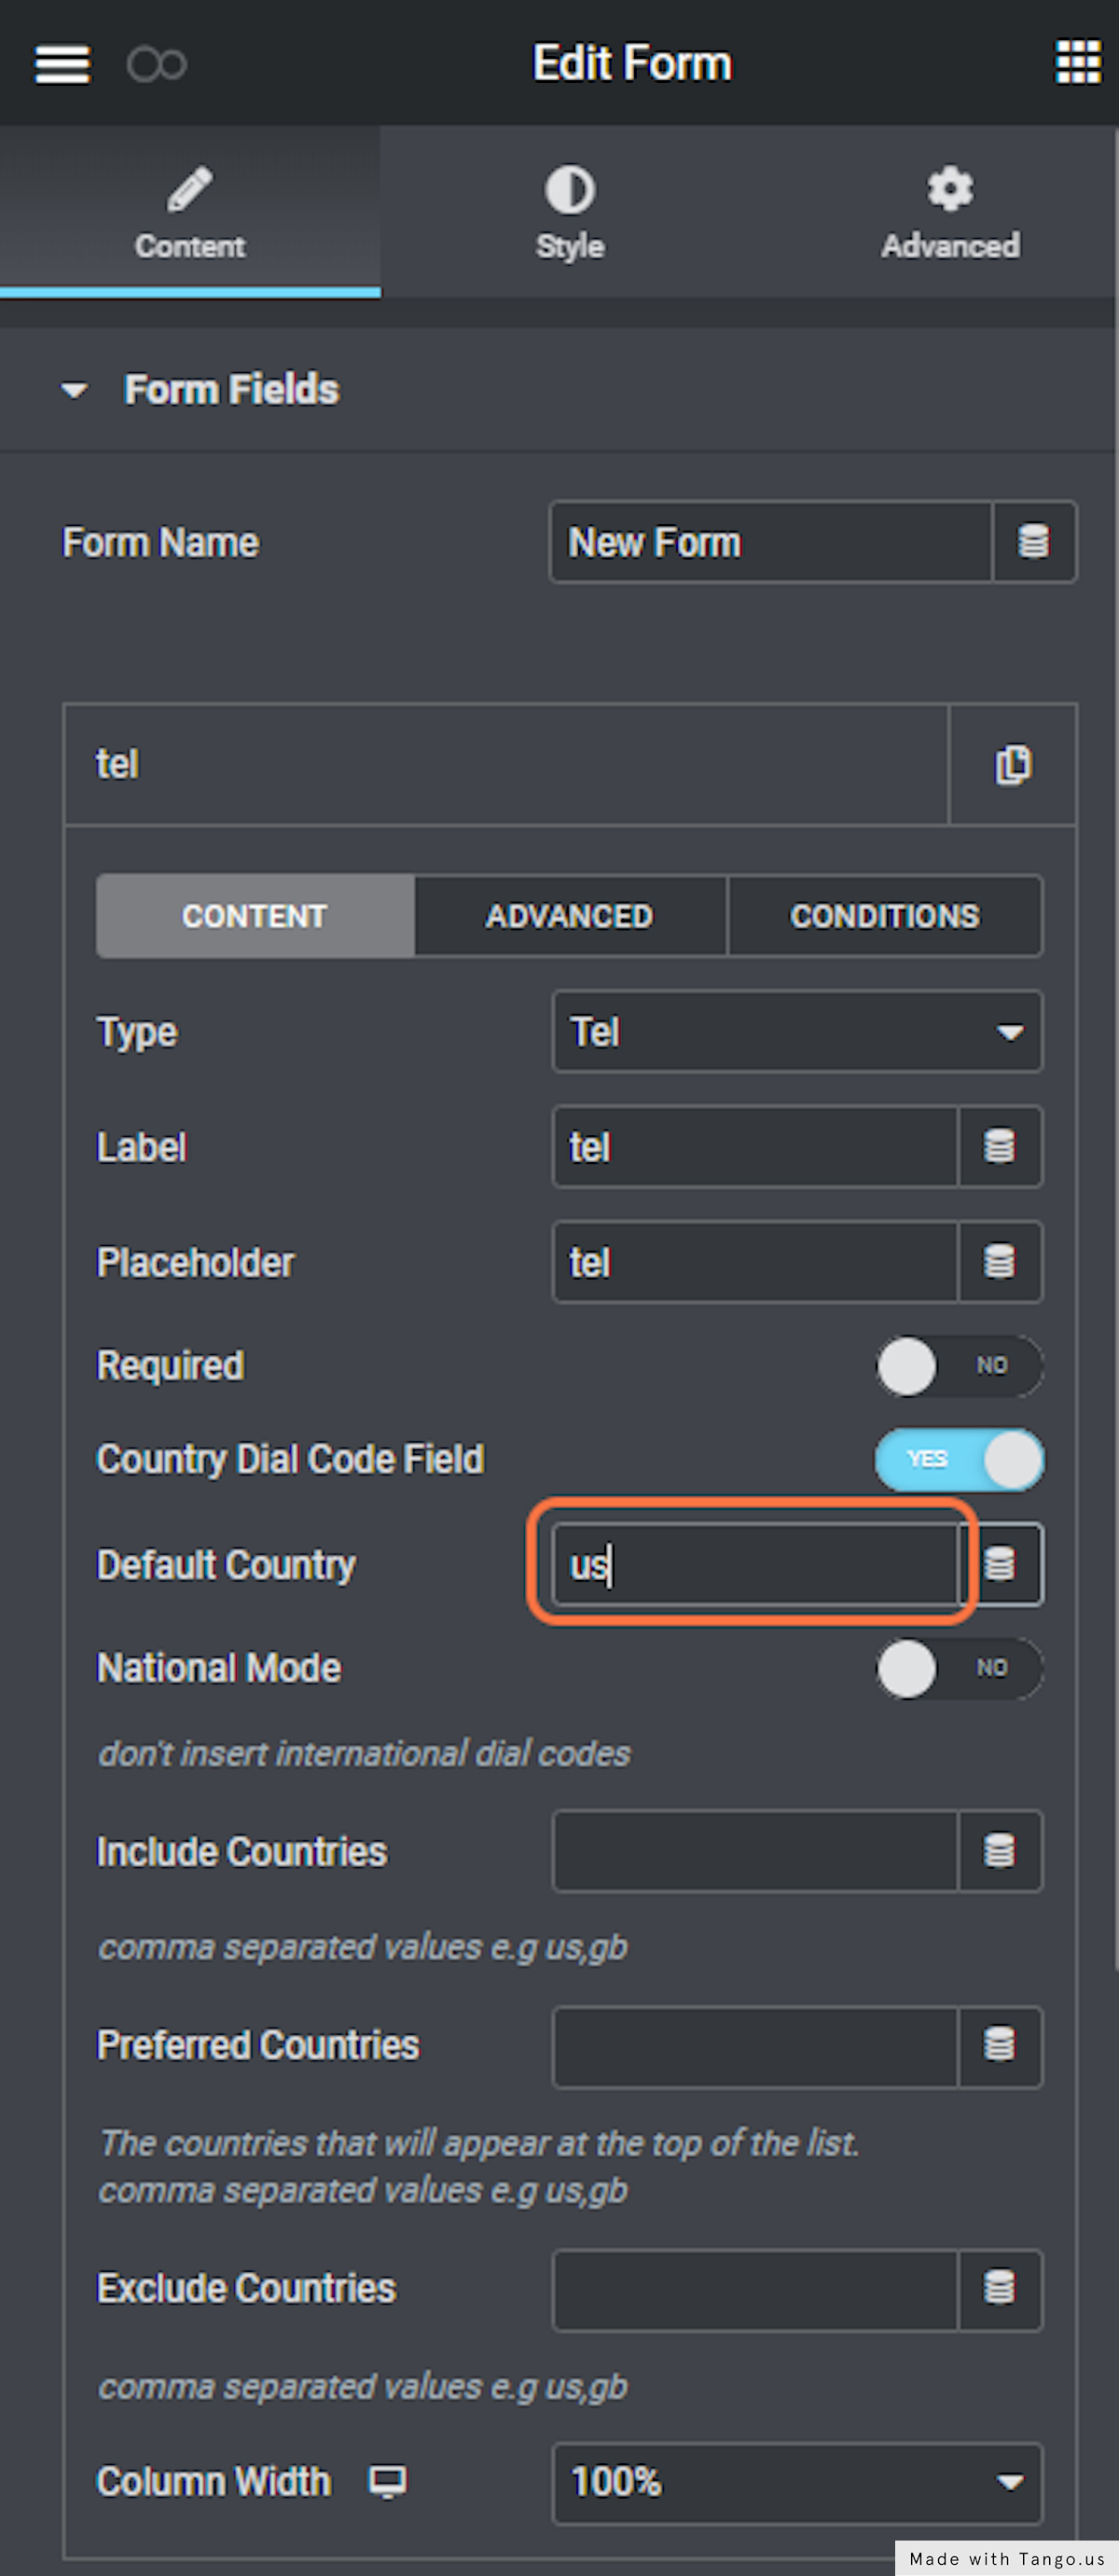 Add the default country code 